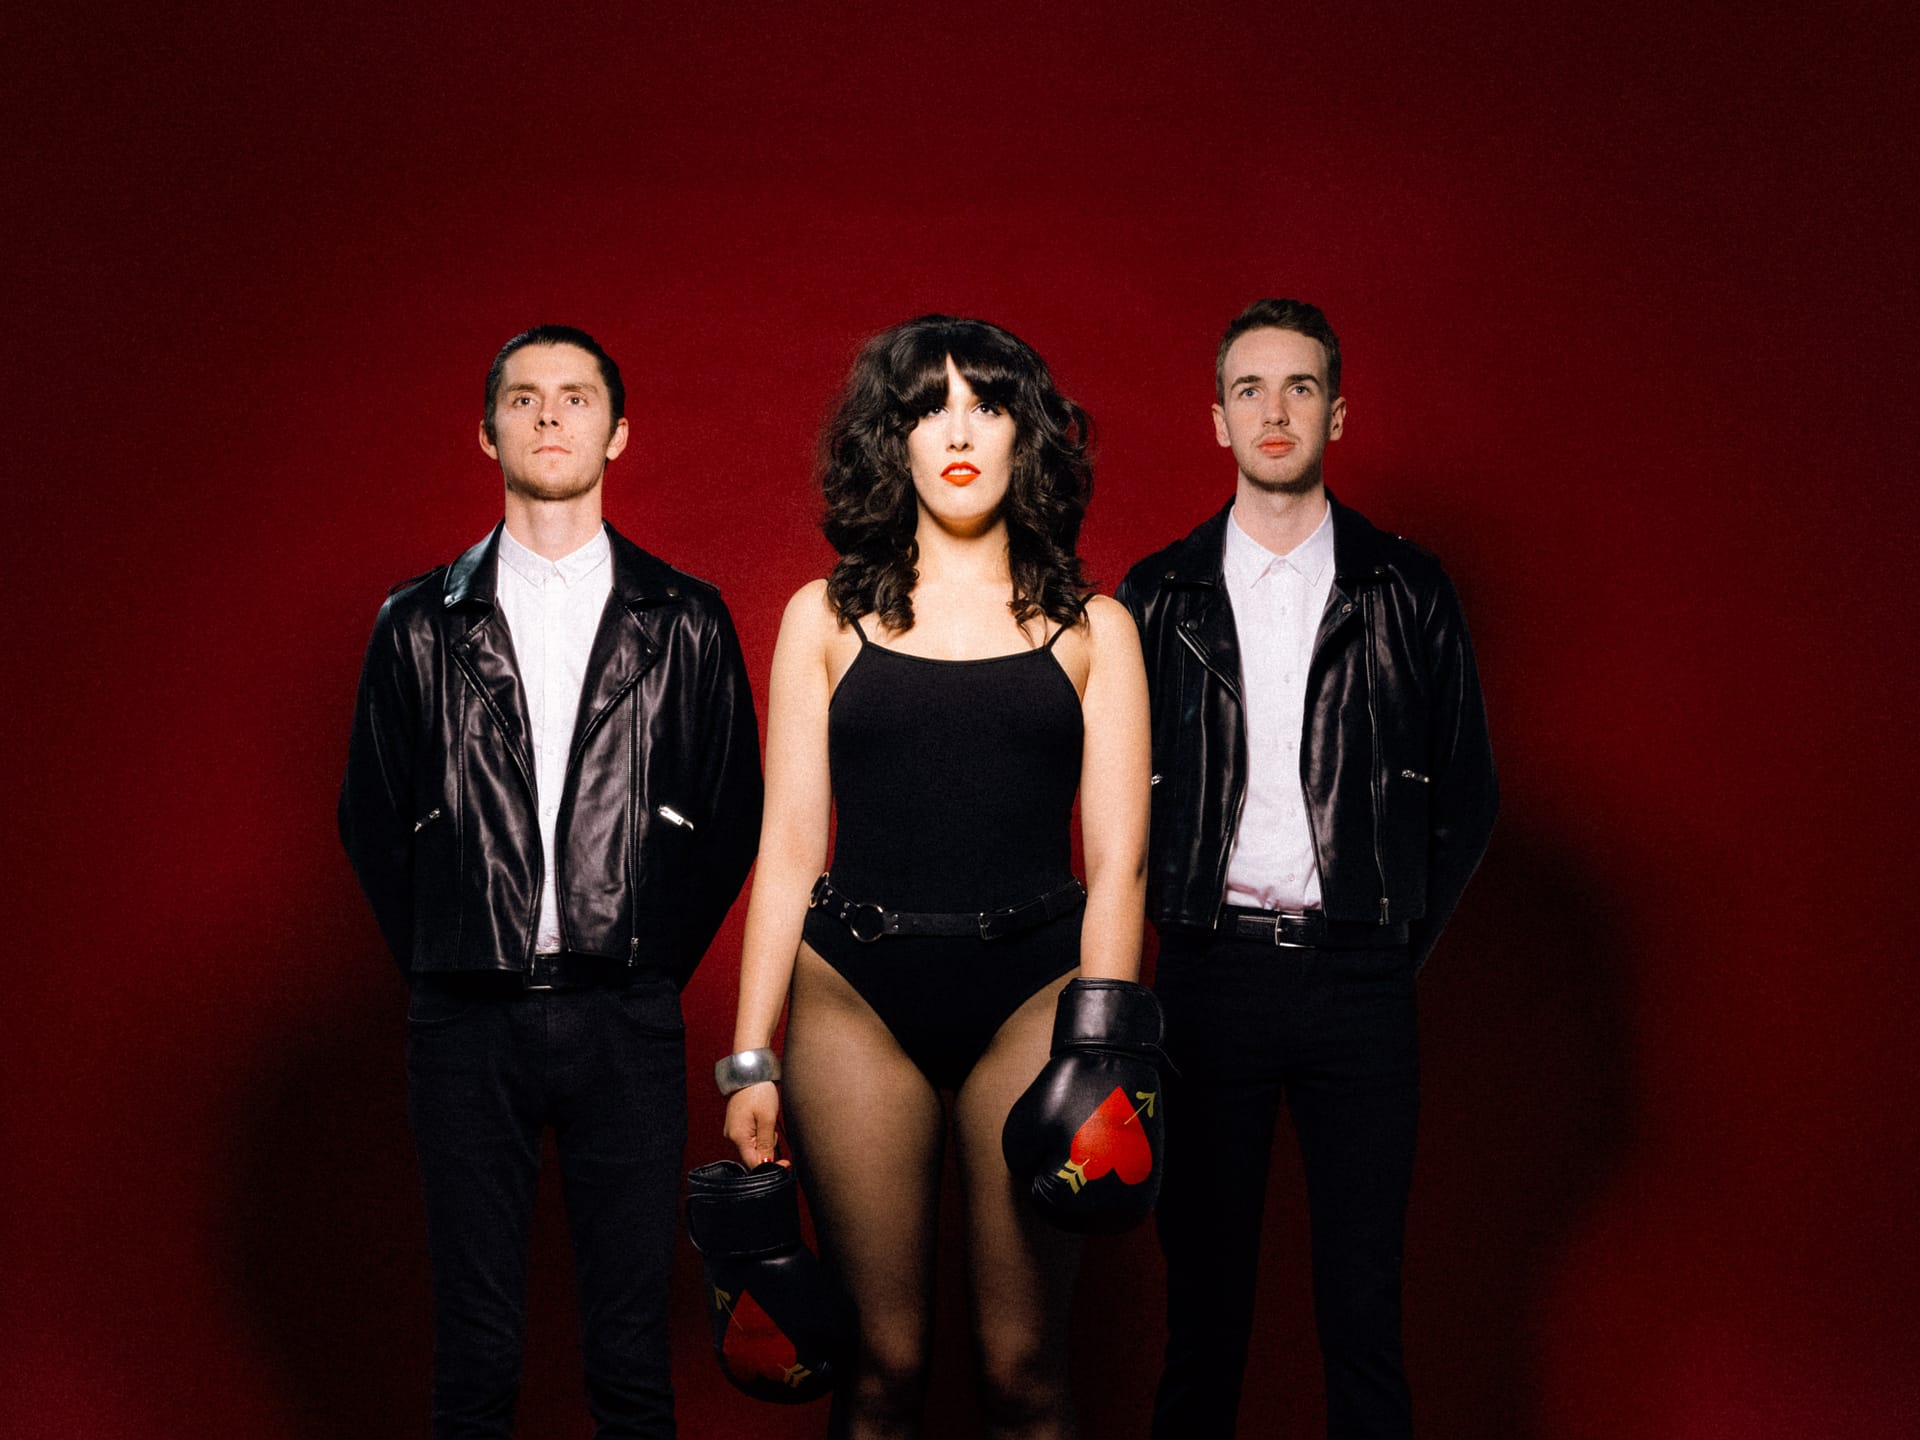 ARABELLA AND THE HEIST Pack A Punch With New Single + Video ‘Electric’